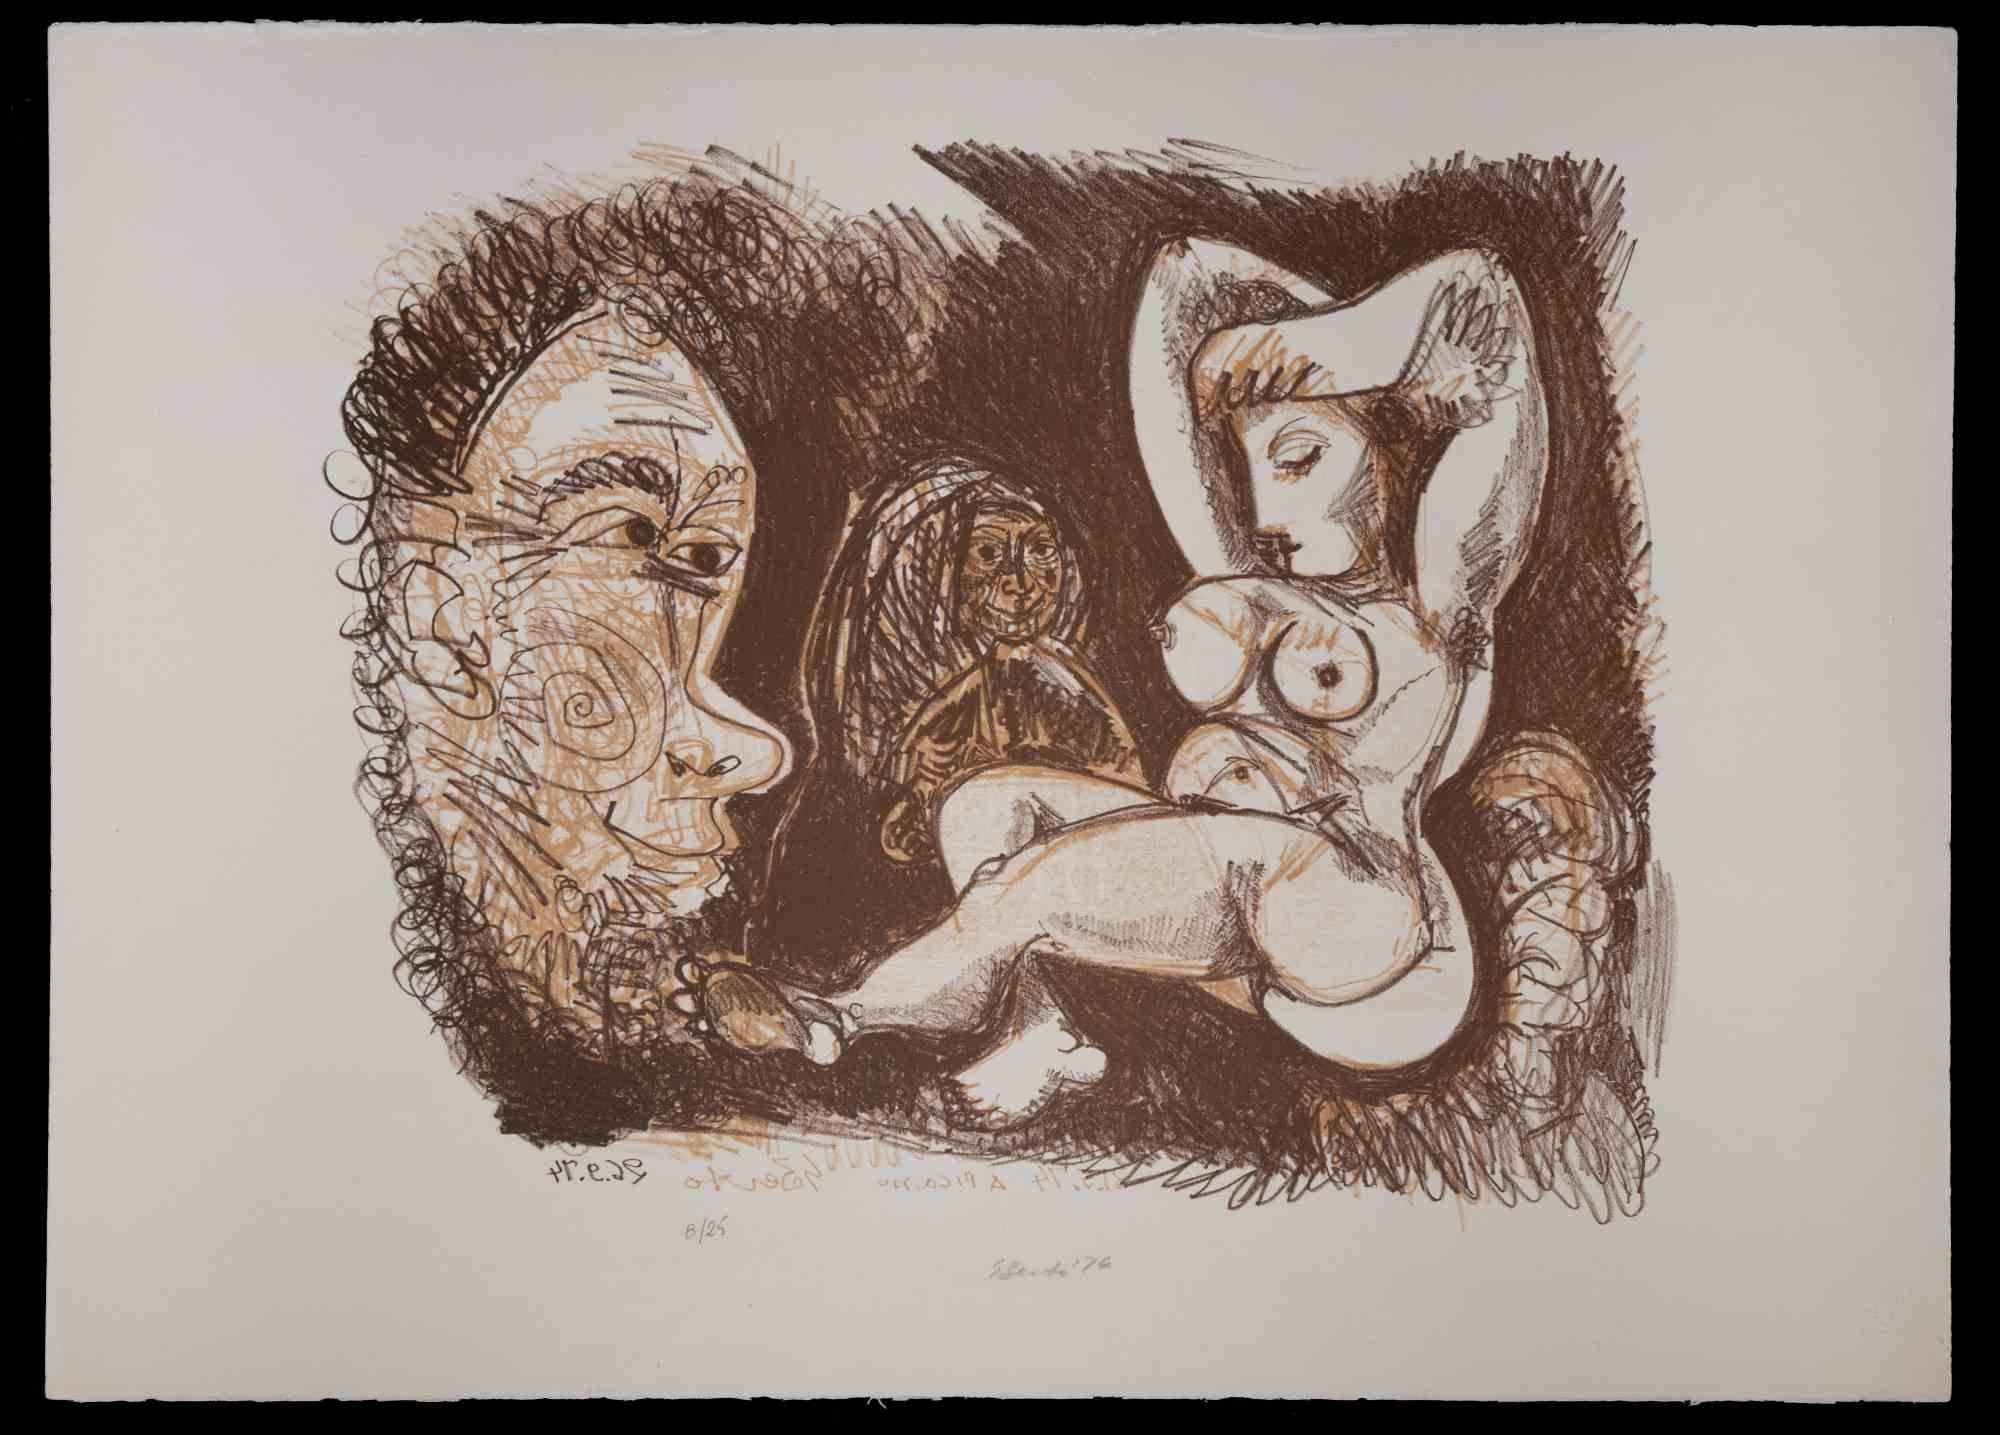 To Picasso is an original lithograph realized by Gian Paolo Berto, in 1974.

Hand-signed and dated on the lower right margin. Numbered on the lower right margin. Edition of 25.

The artwork represents a tribute to Picasso through strong strokes